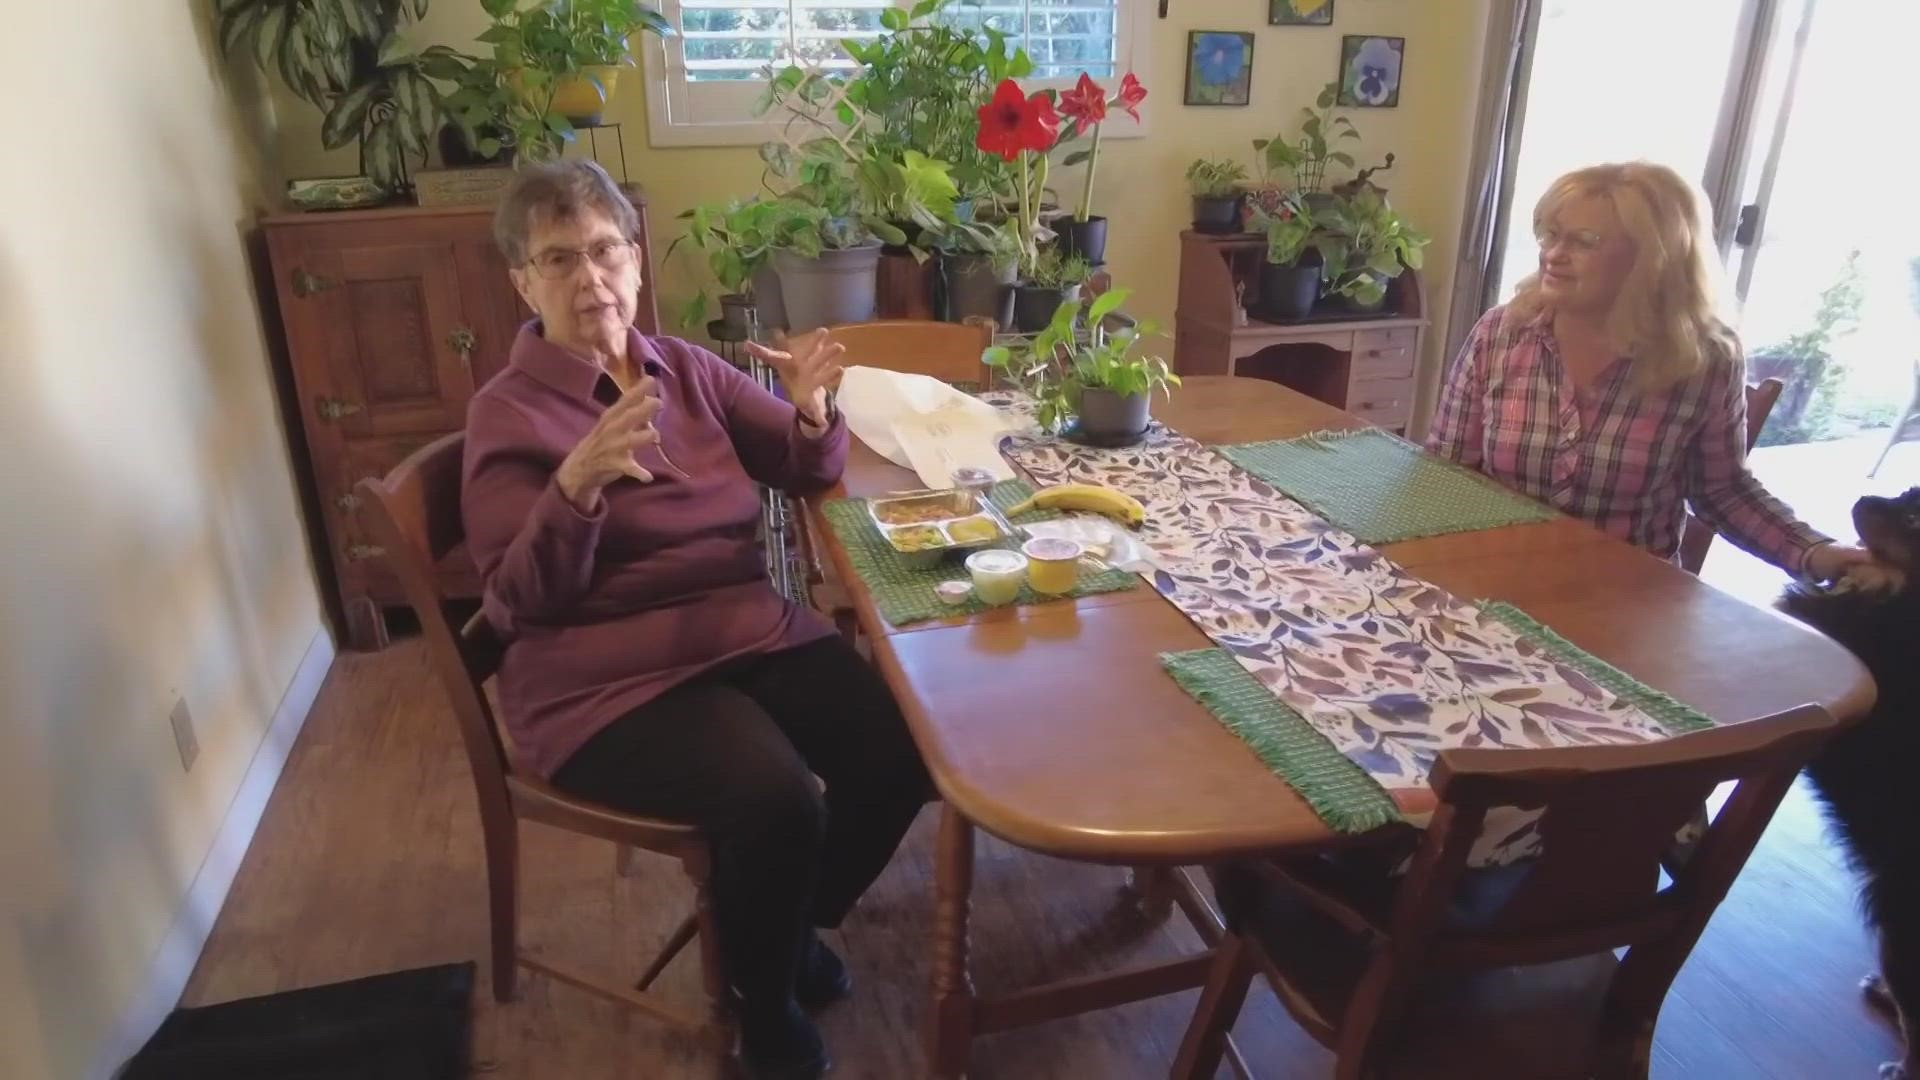 Food insecurity among seniors is a growing issue across the country. See how elderly residents in Tempe are being supported.